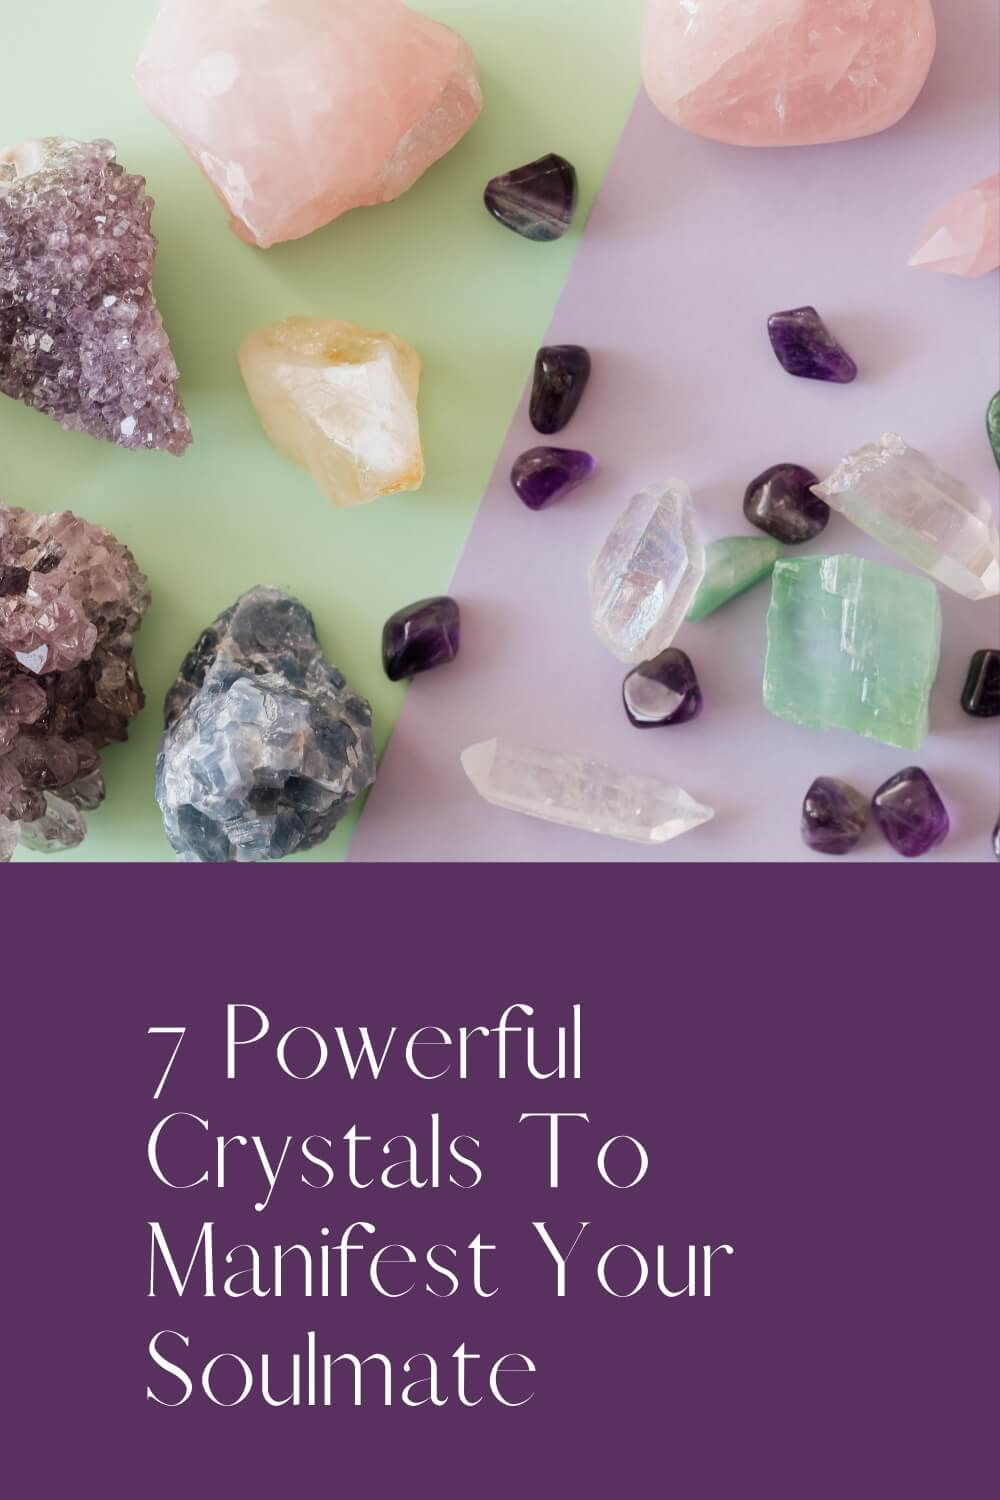 7 Powerful Crystals To Manifest Your Soulmate